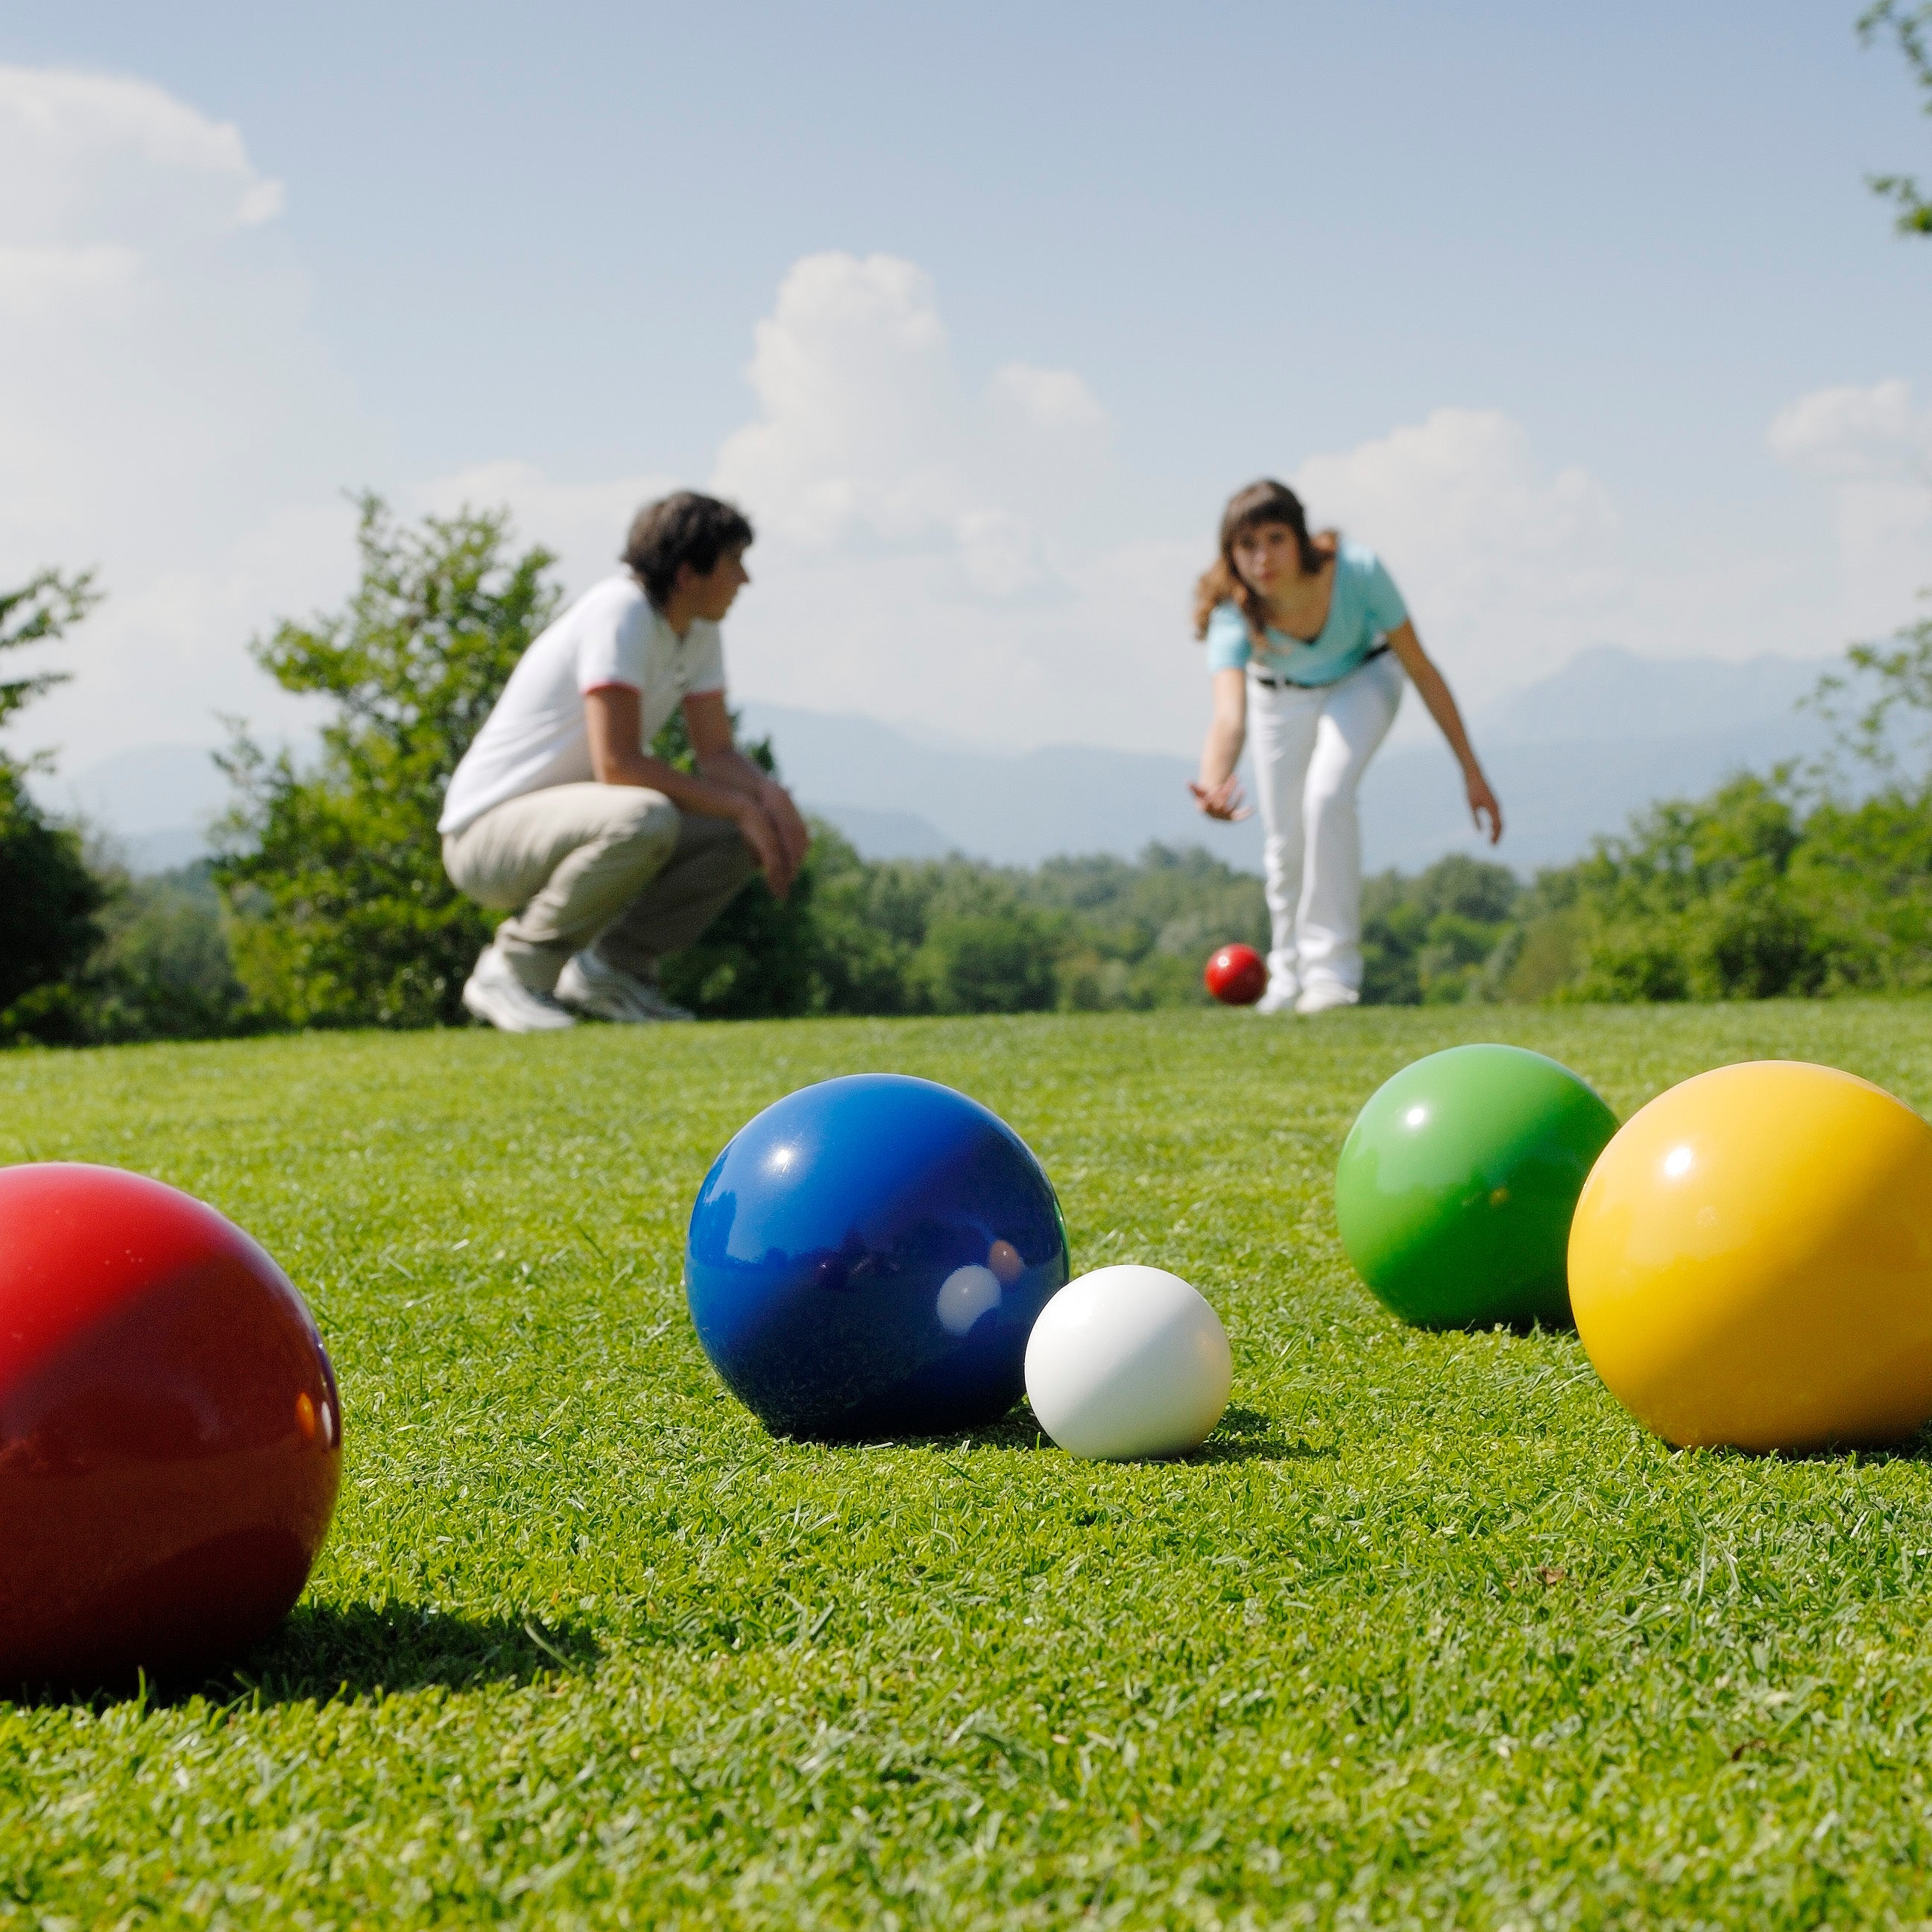 Couple playing bocce outside in an open lawn.